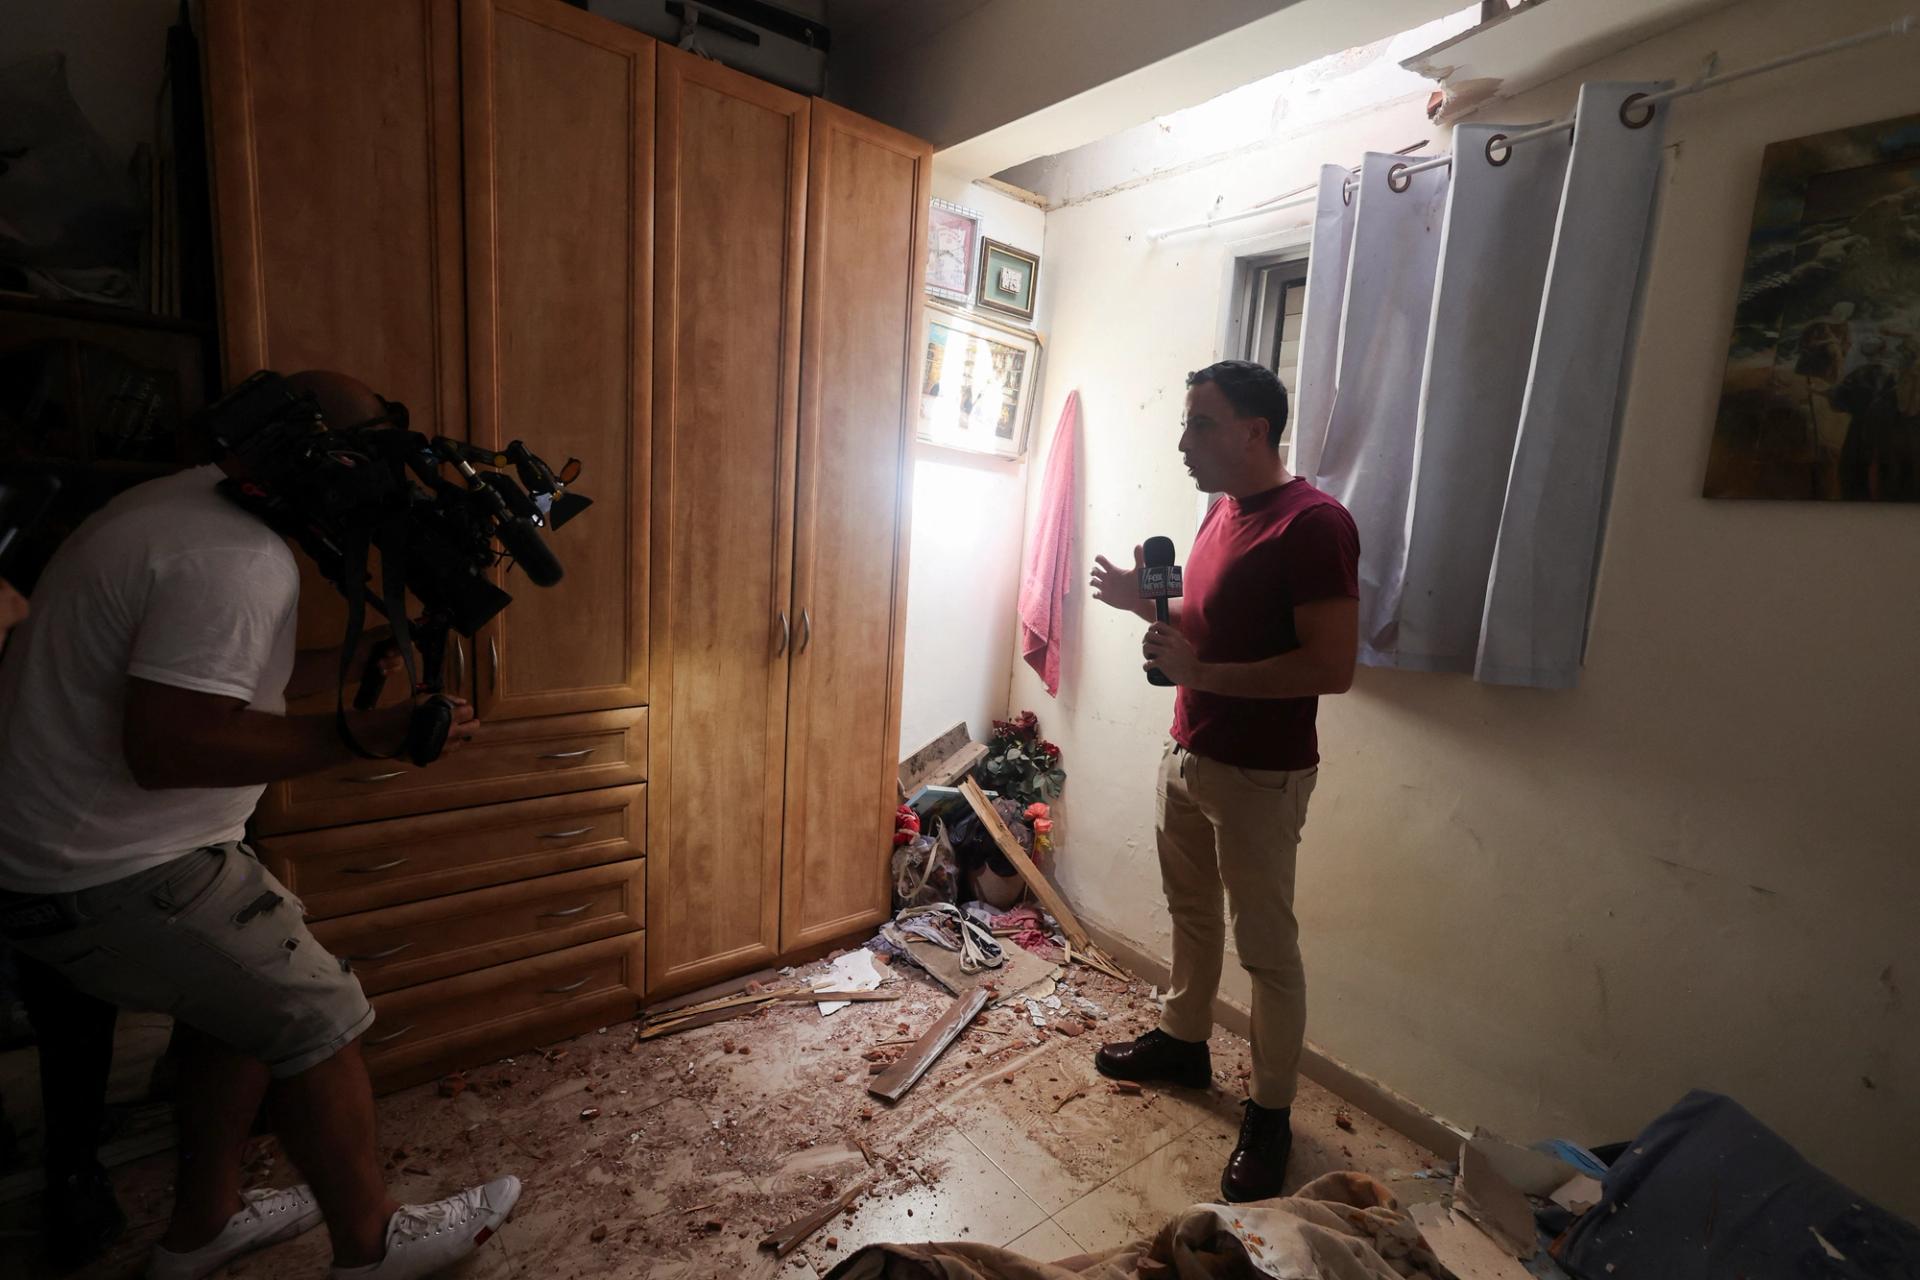 A media person reports from inside a house damaged after rockets were fired from the Gaza Strip towards Israel.